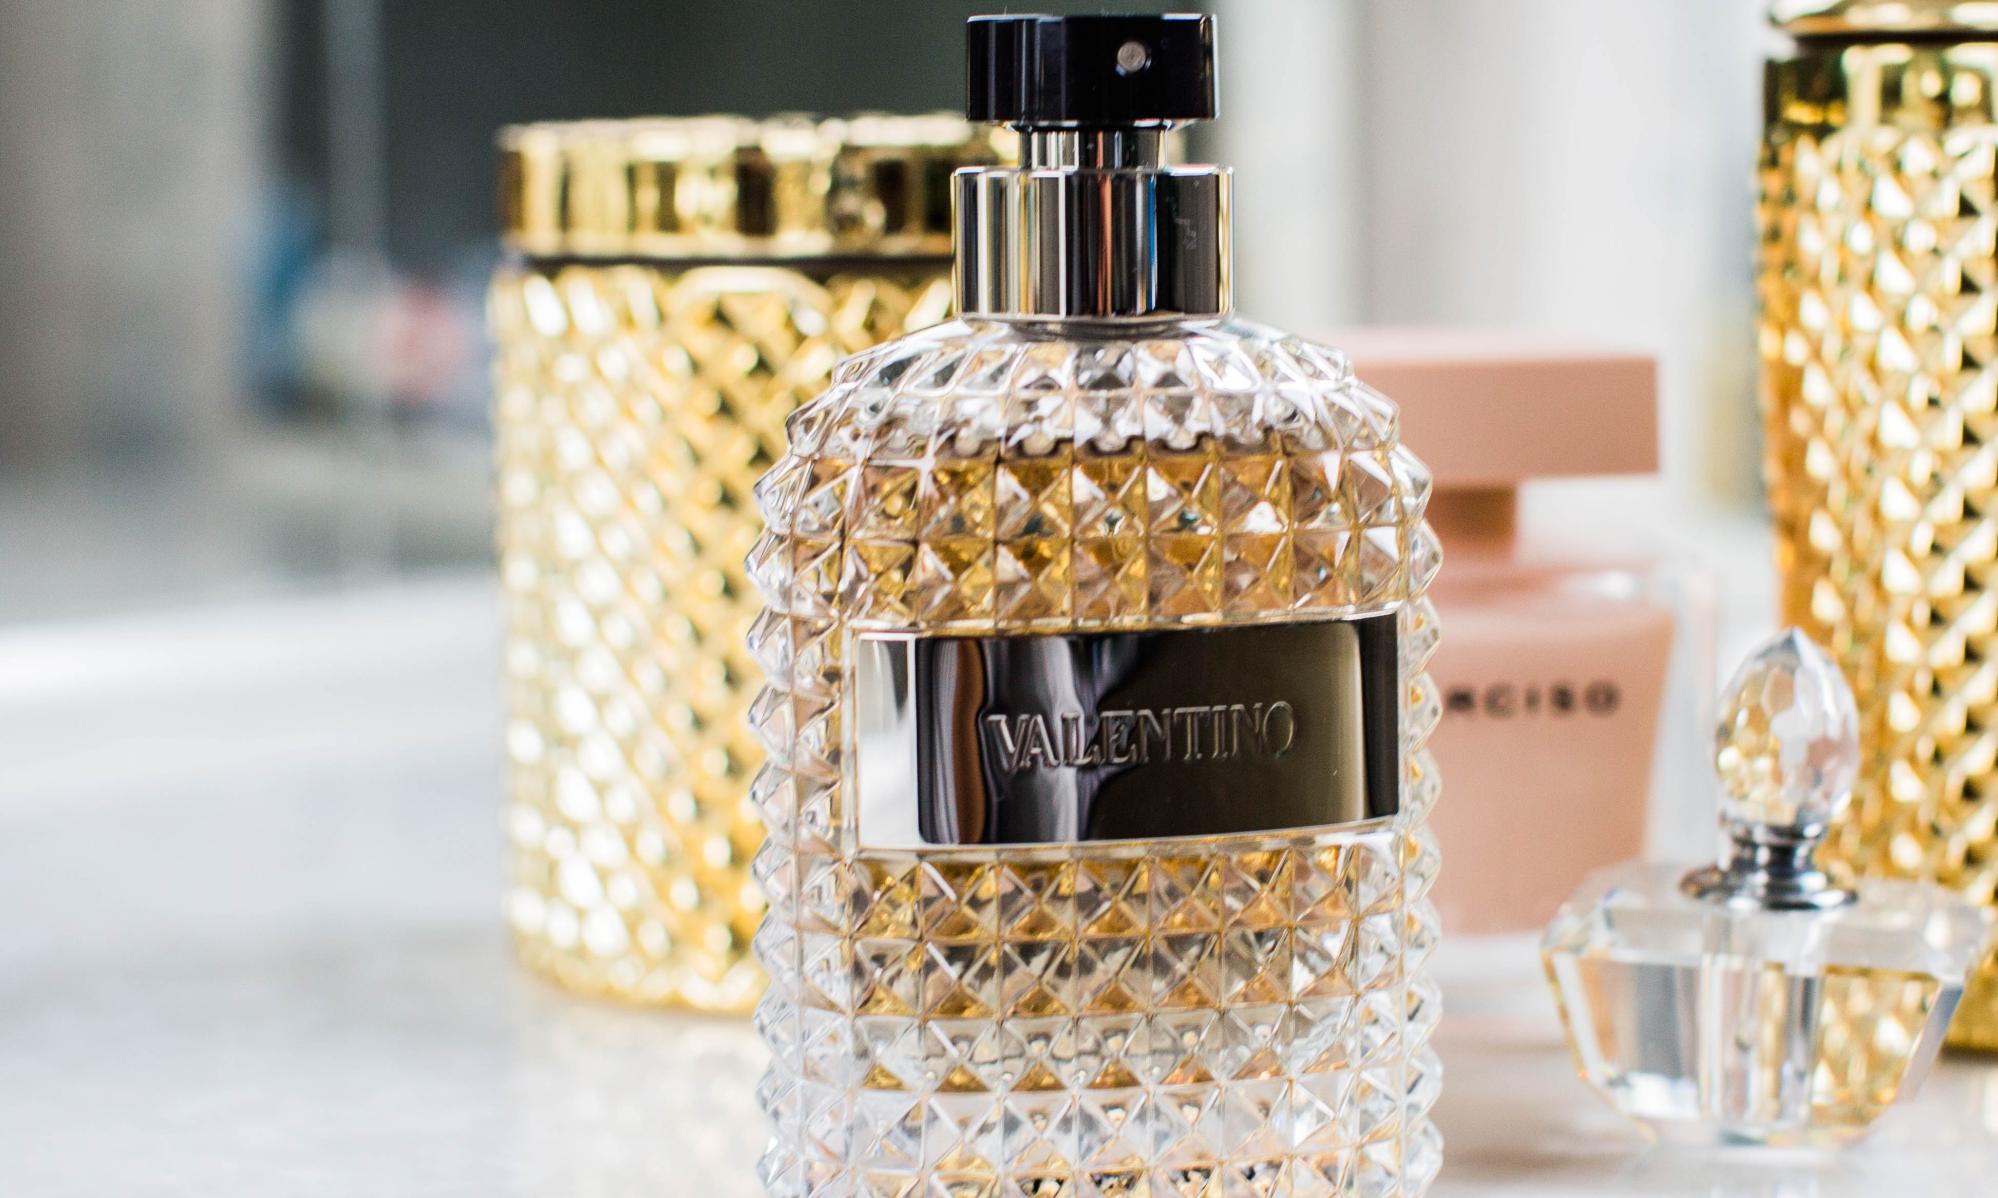 Need a side hustle? How to start selling perfumes and earn an